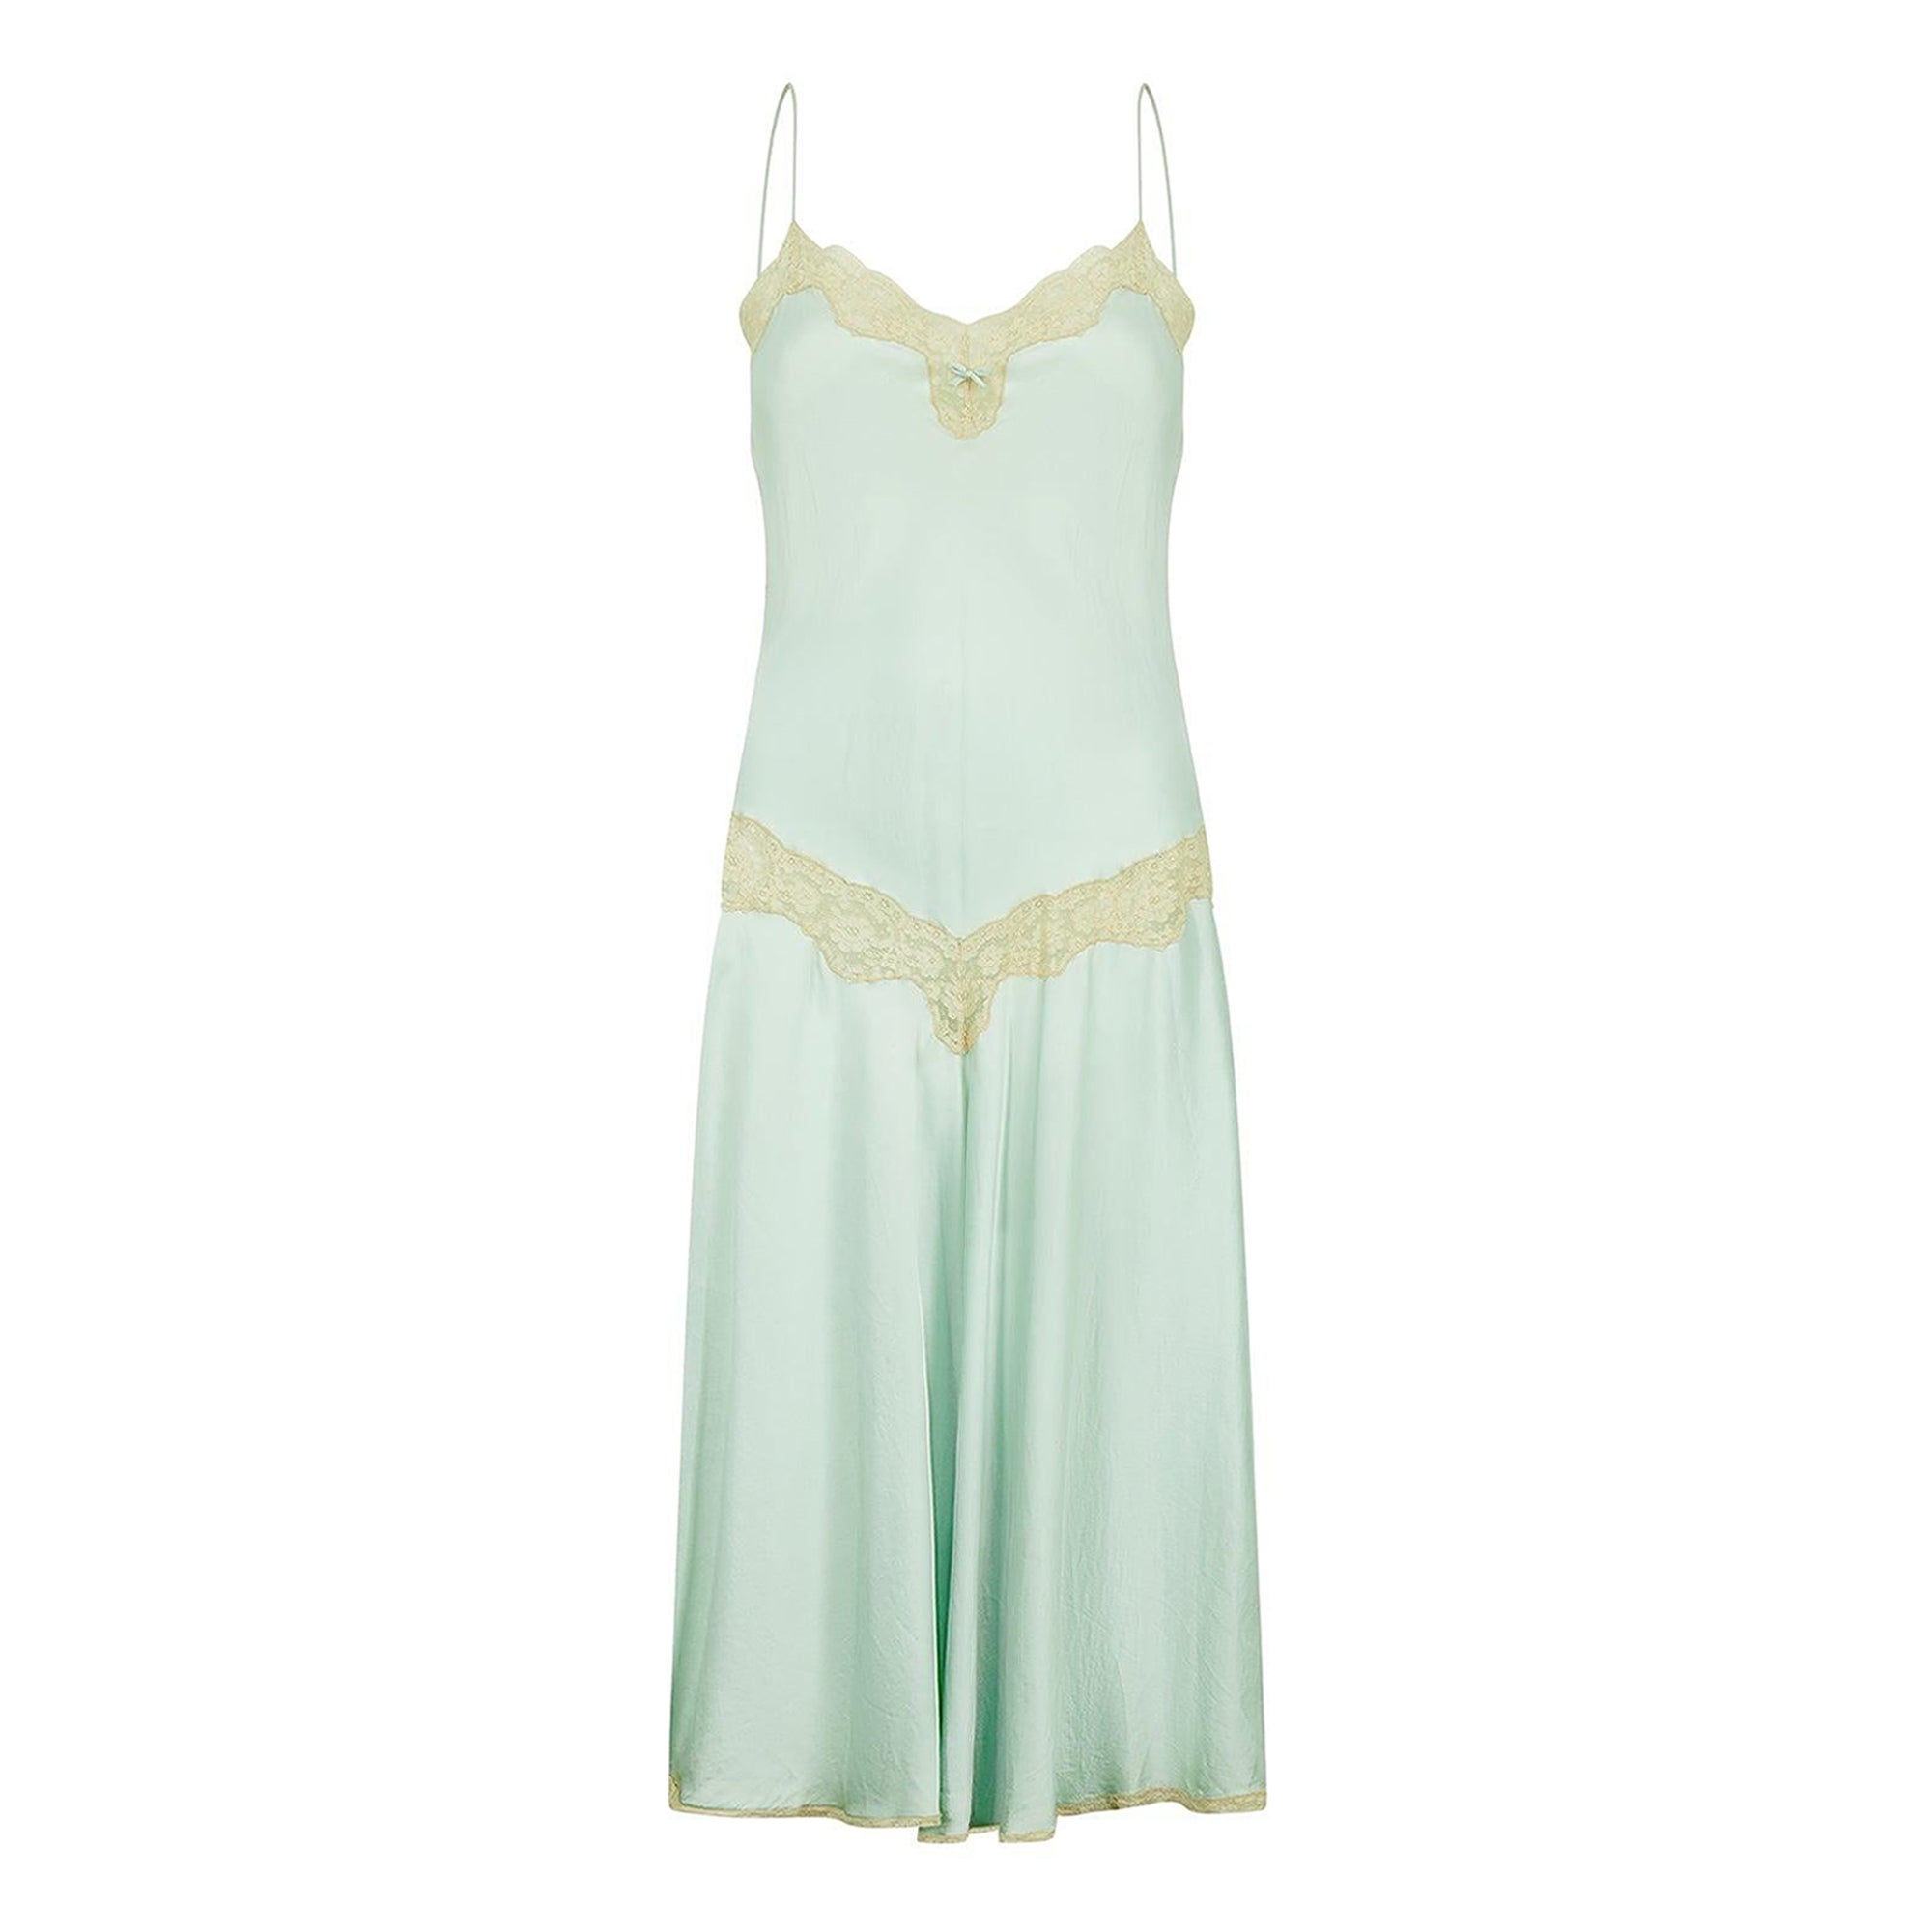 1980s Jenny Dobell Seafoam Green and Lace Slip Dress For Sale